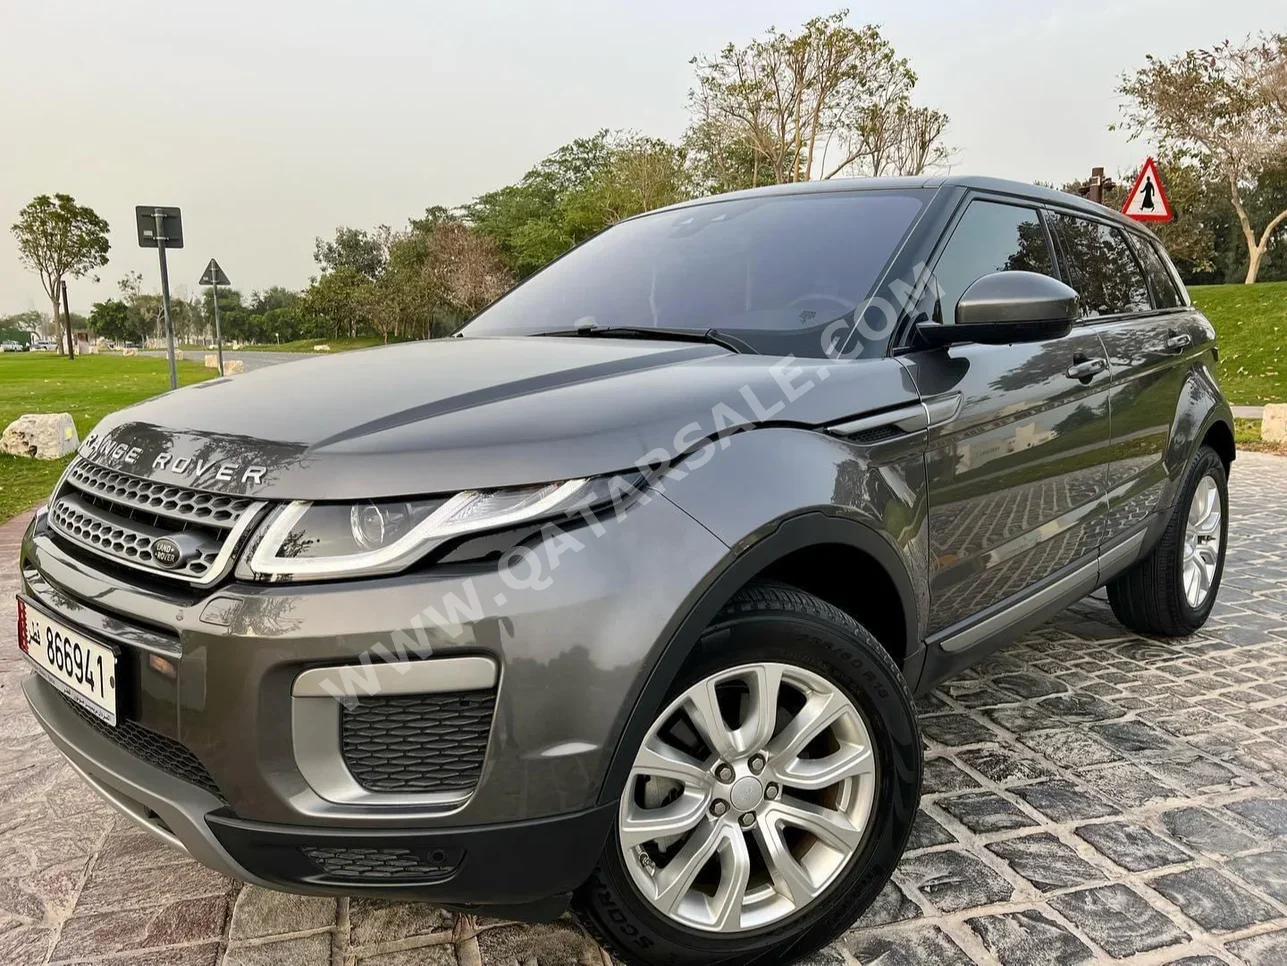 Land Rover  Evoque  Dynamic  2017  Automatic  49,000 Km  4 Cylinder  Four Wheel Drive (4WD)  SUV  Gray